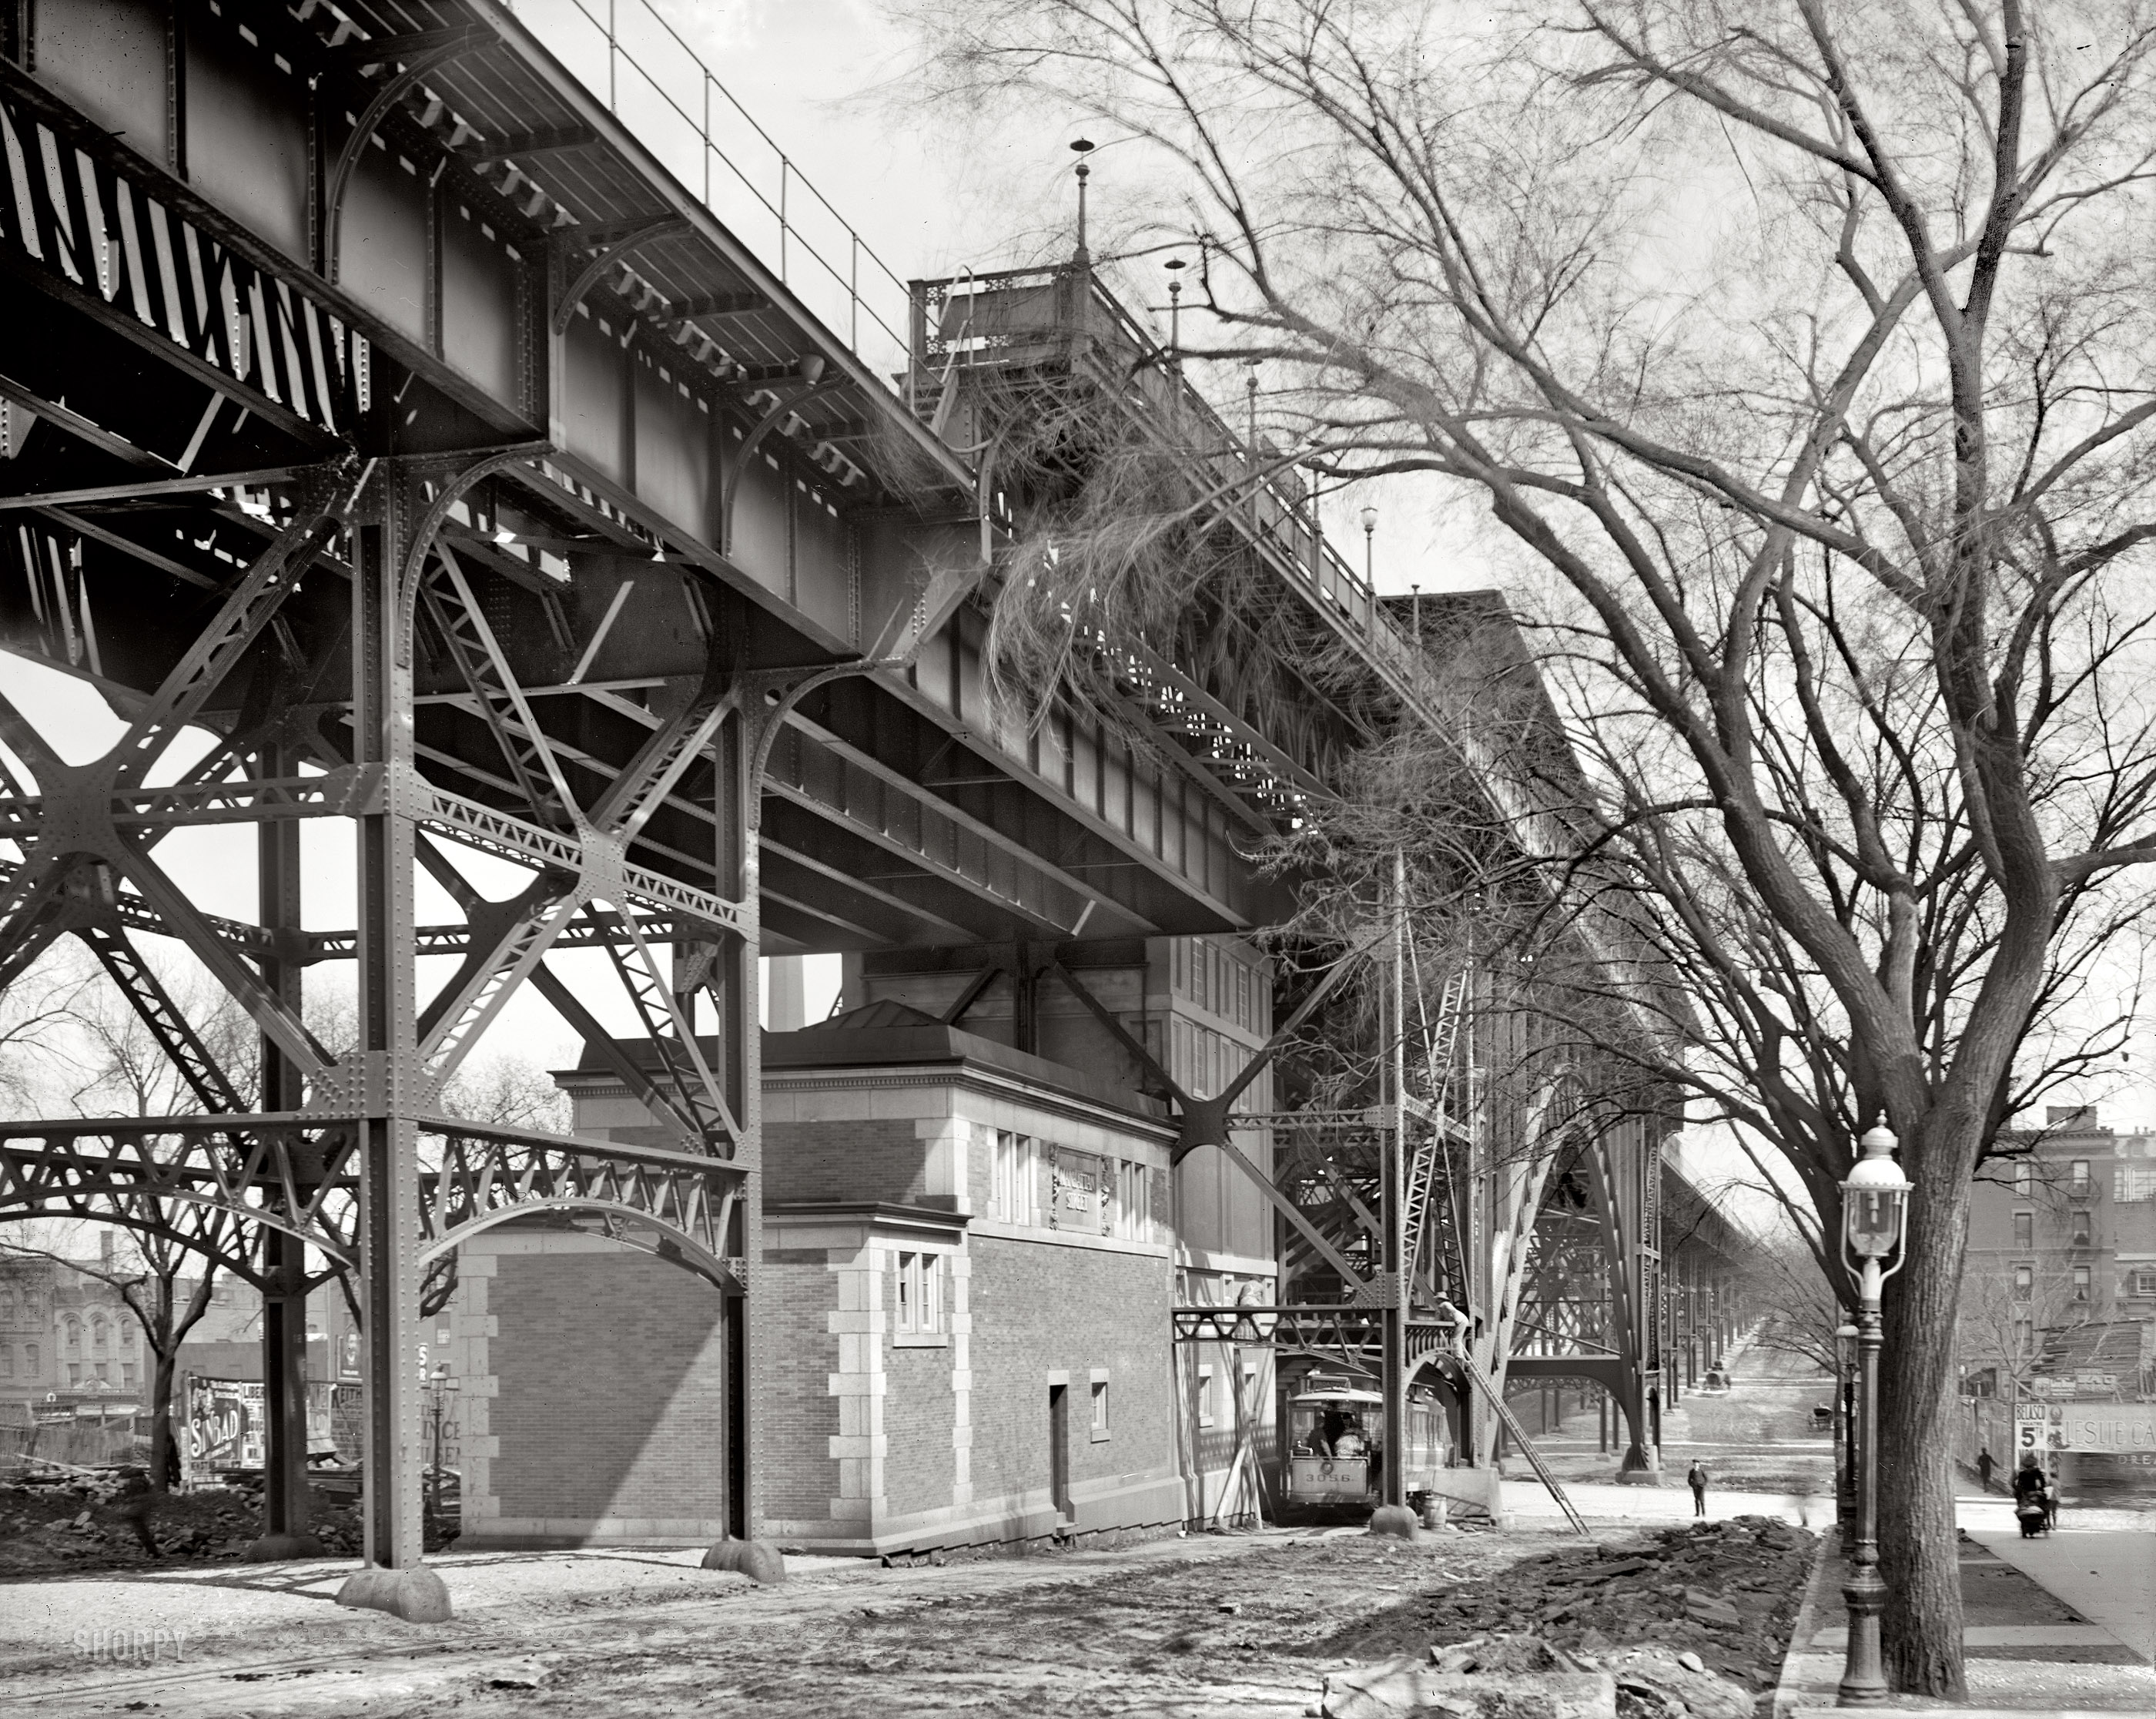 New York City circa 1905. "Where the subway is an elevated." 8x10 inch dry plate glass negative, Detroit Publishing Company. View full size.